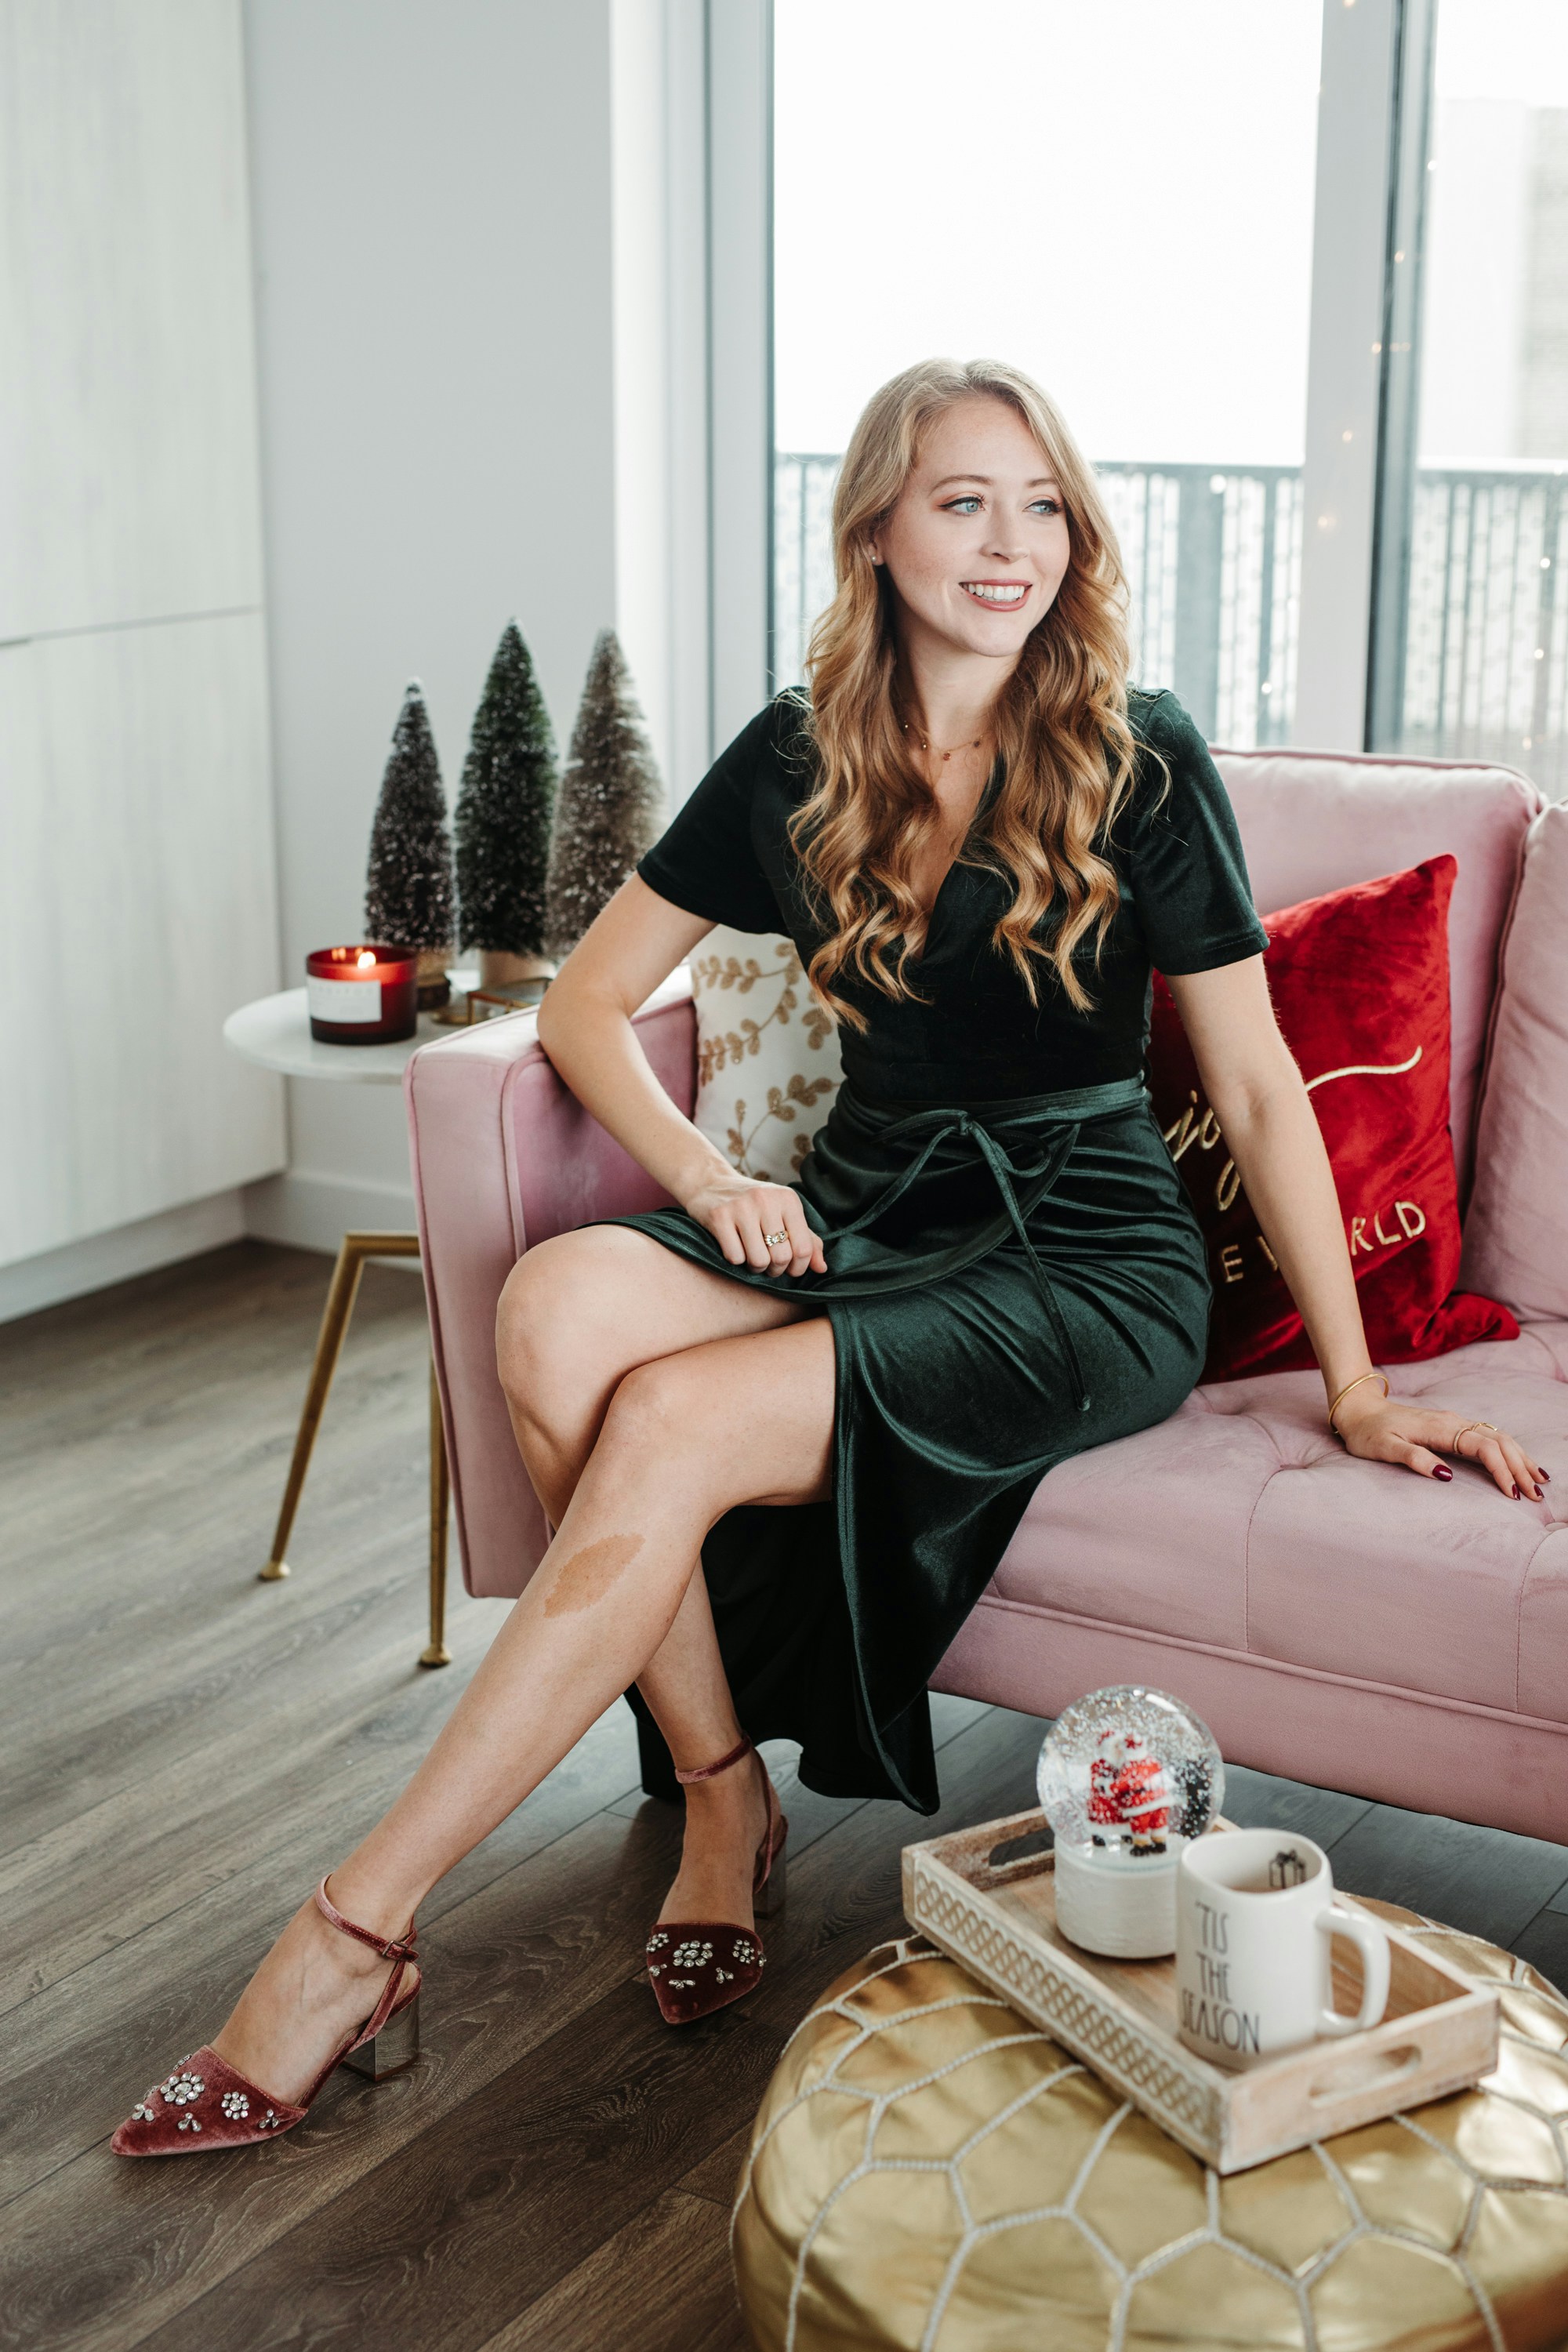 Condo Christmas Decor: gold, pink velvet couch, red velvet cushions, bottlebrush trees - home decorating ideas for the Holidays with HomeSense Canada.